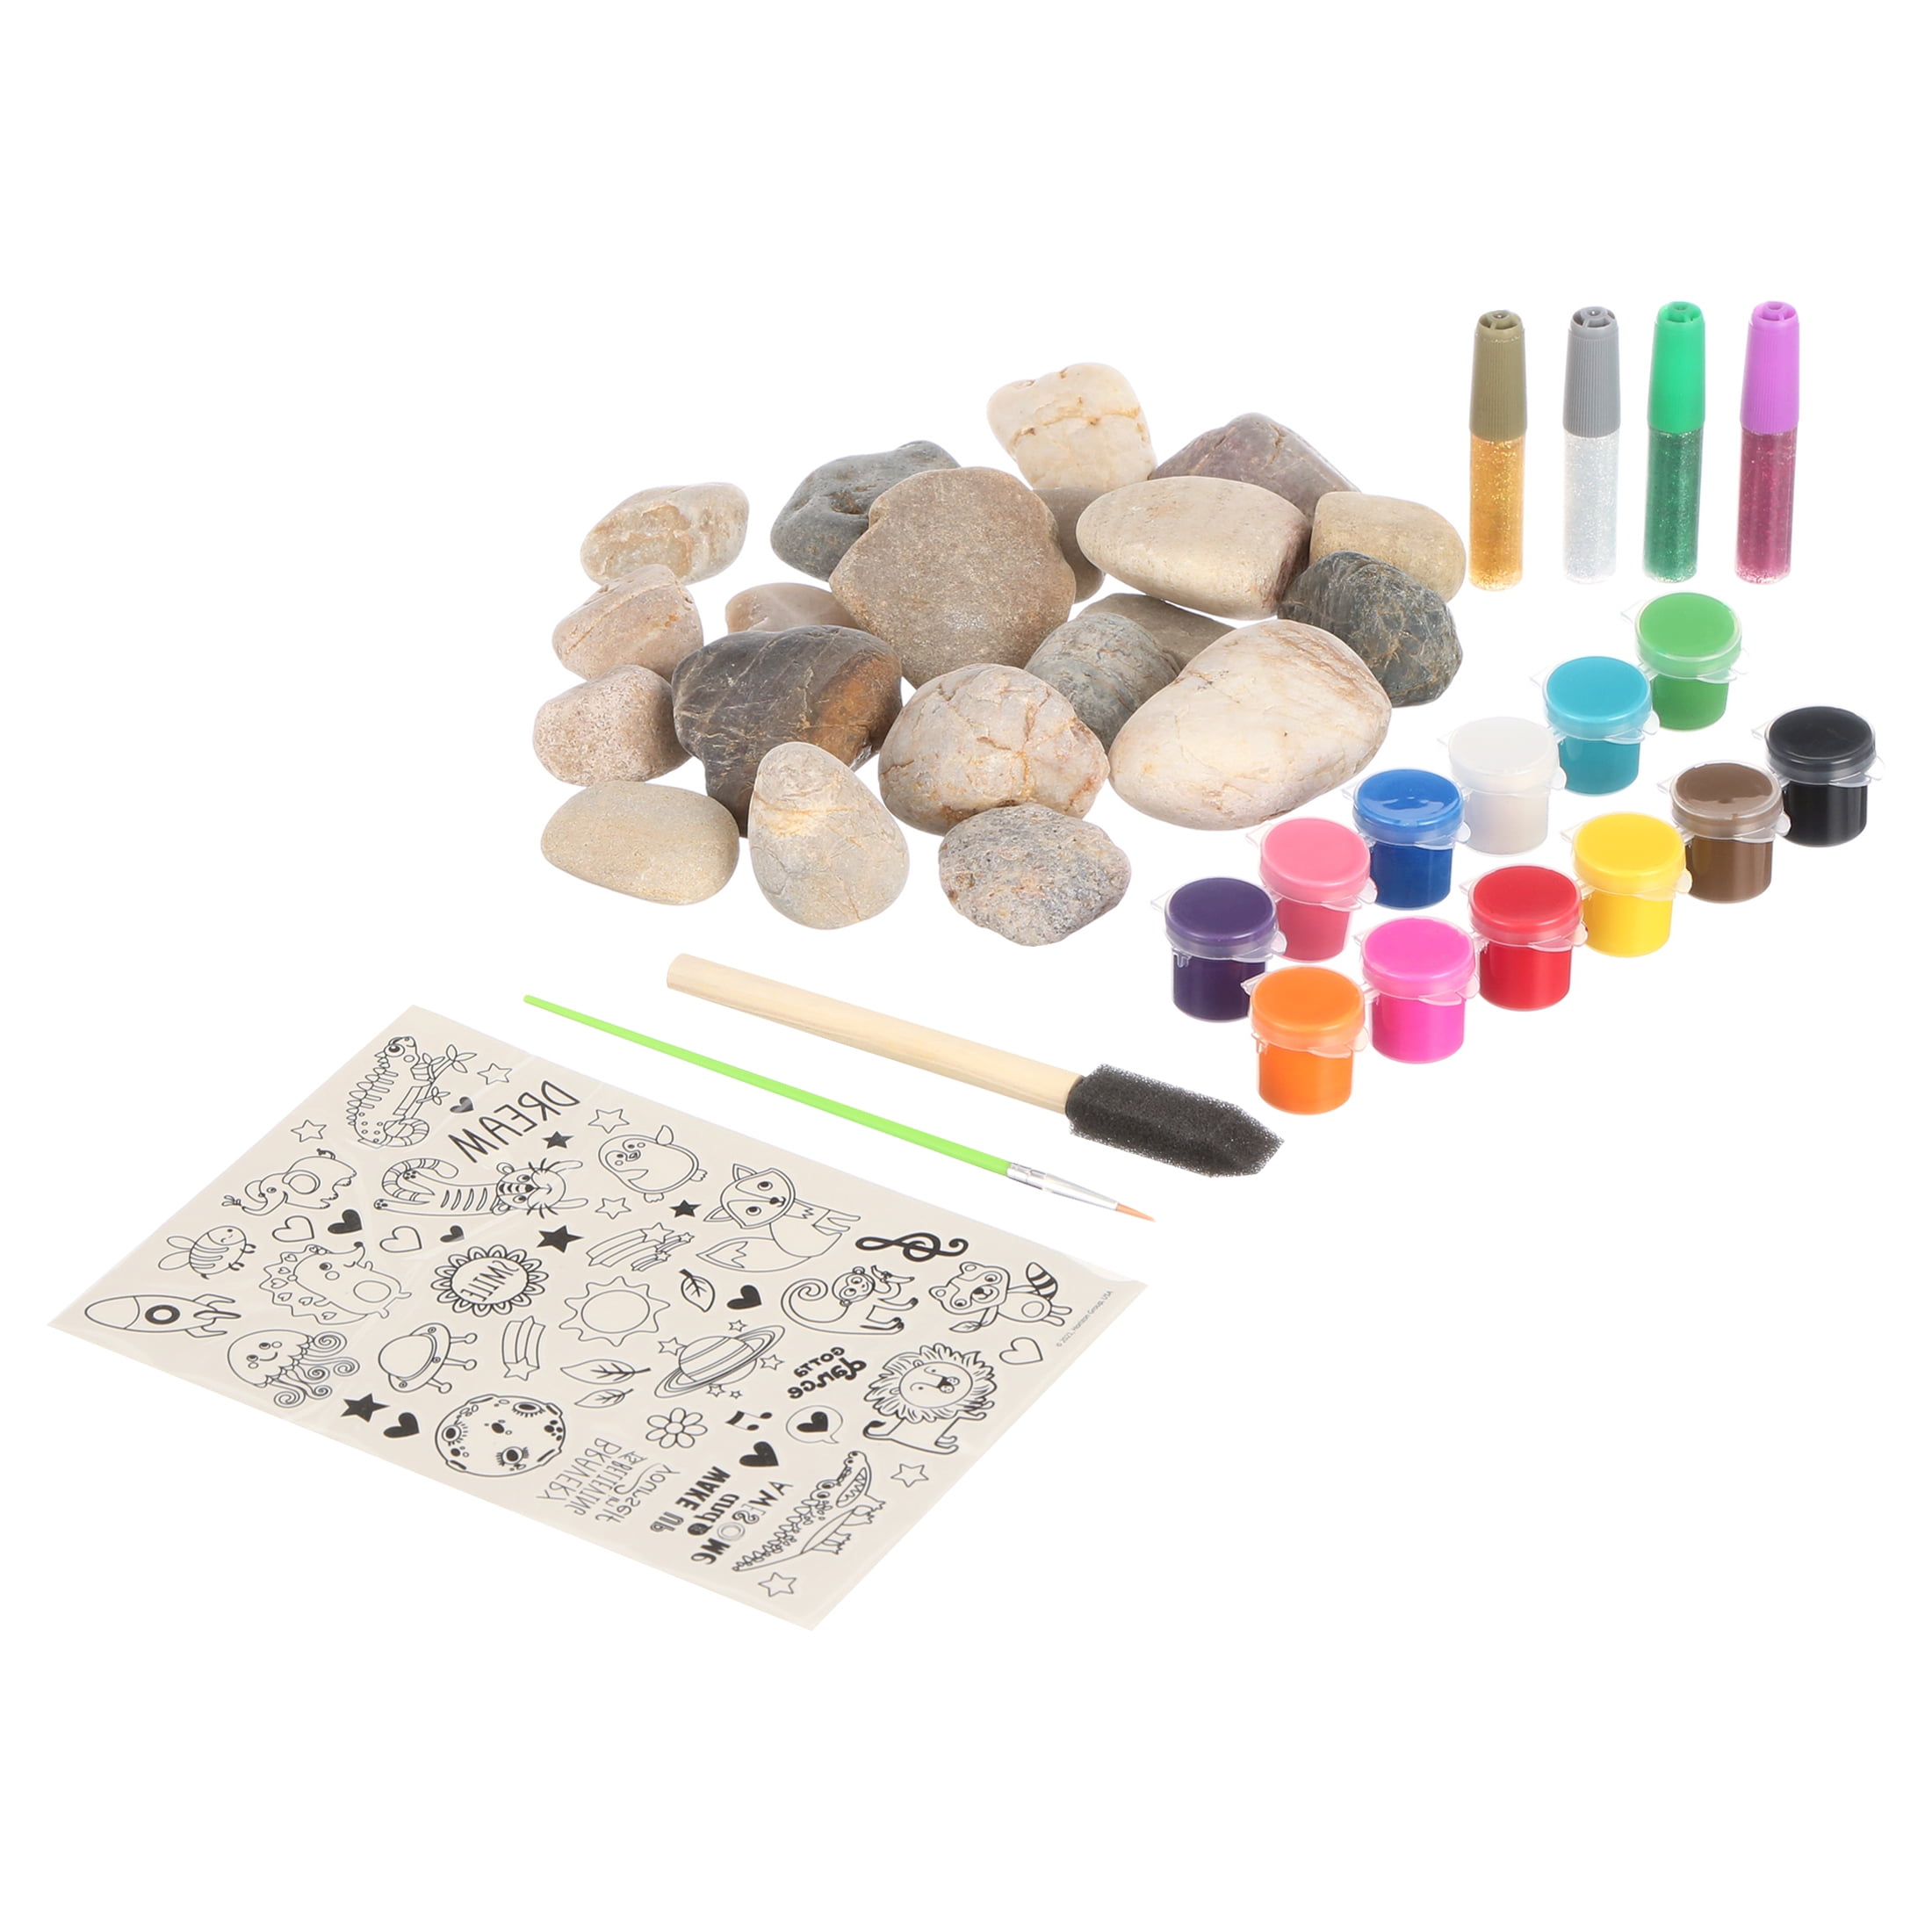 Mega Rock Painting Kit With Paints and Rocks, DIY Art Kit, Paint Rocks,  Over 280 Pieces -  Finland